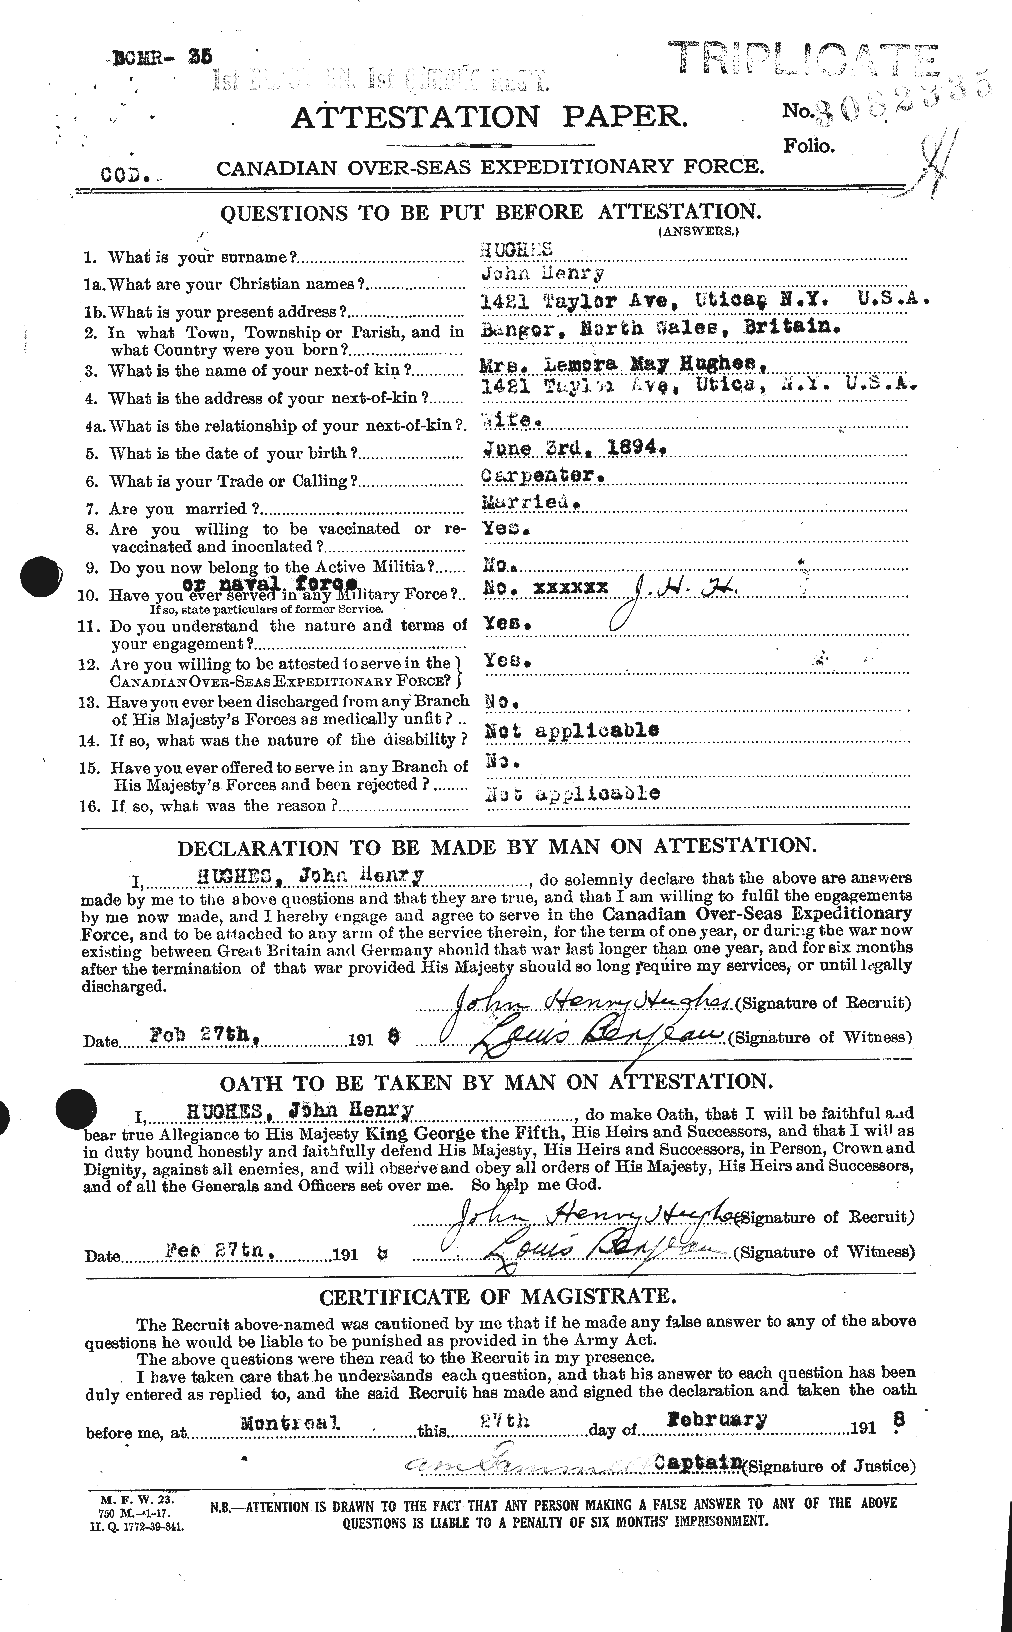 Personnel Records of the First World War - CEF 404028a